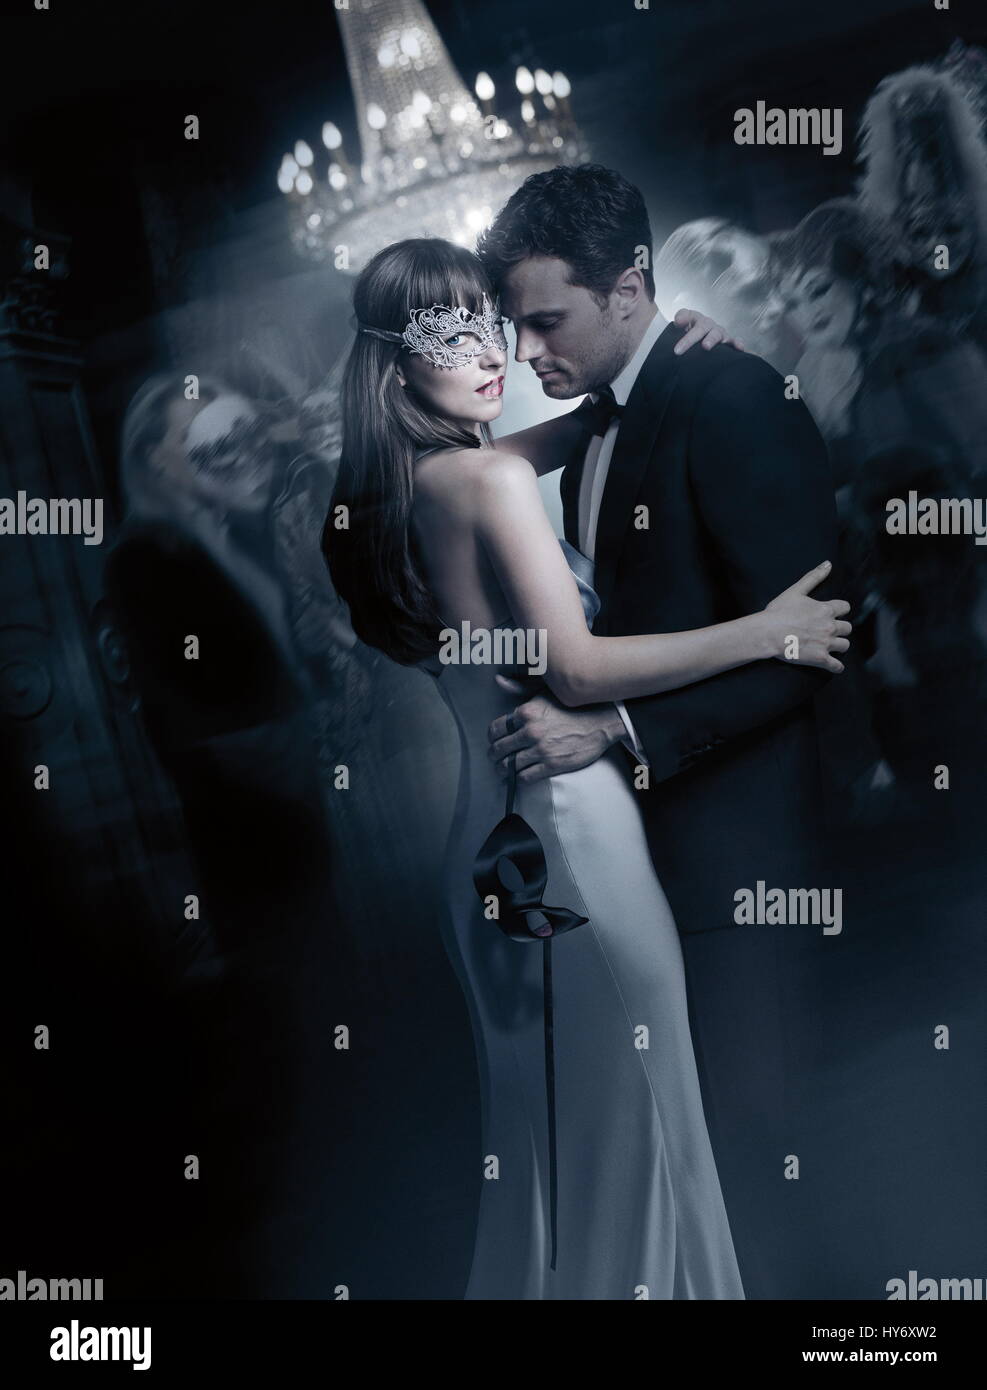 RELEASE DATE: February 10, 2017 TITLE: Fifty Shades Darker STUDIO: Universal Pictures DIRECTOR: James Foley PLOT: While Christian wrestles with his inner demons, Anastasia must confront the anger and envy of the women who came before her STARRING: Dakota Johnson as Anastasia Steele, Jamie Dornan as Christian Grey Poster Art (Credit: © Universal Pictures/Entertainment Pictures/ZUMAPRESS.com) Stock Photo